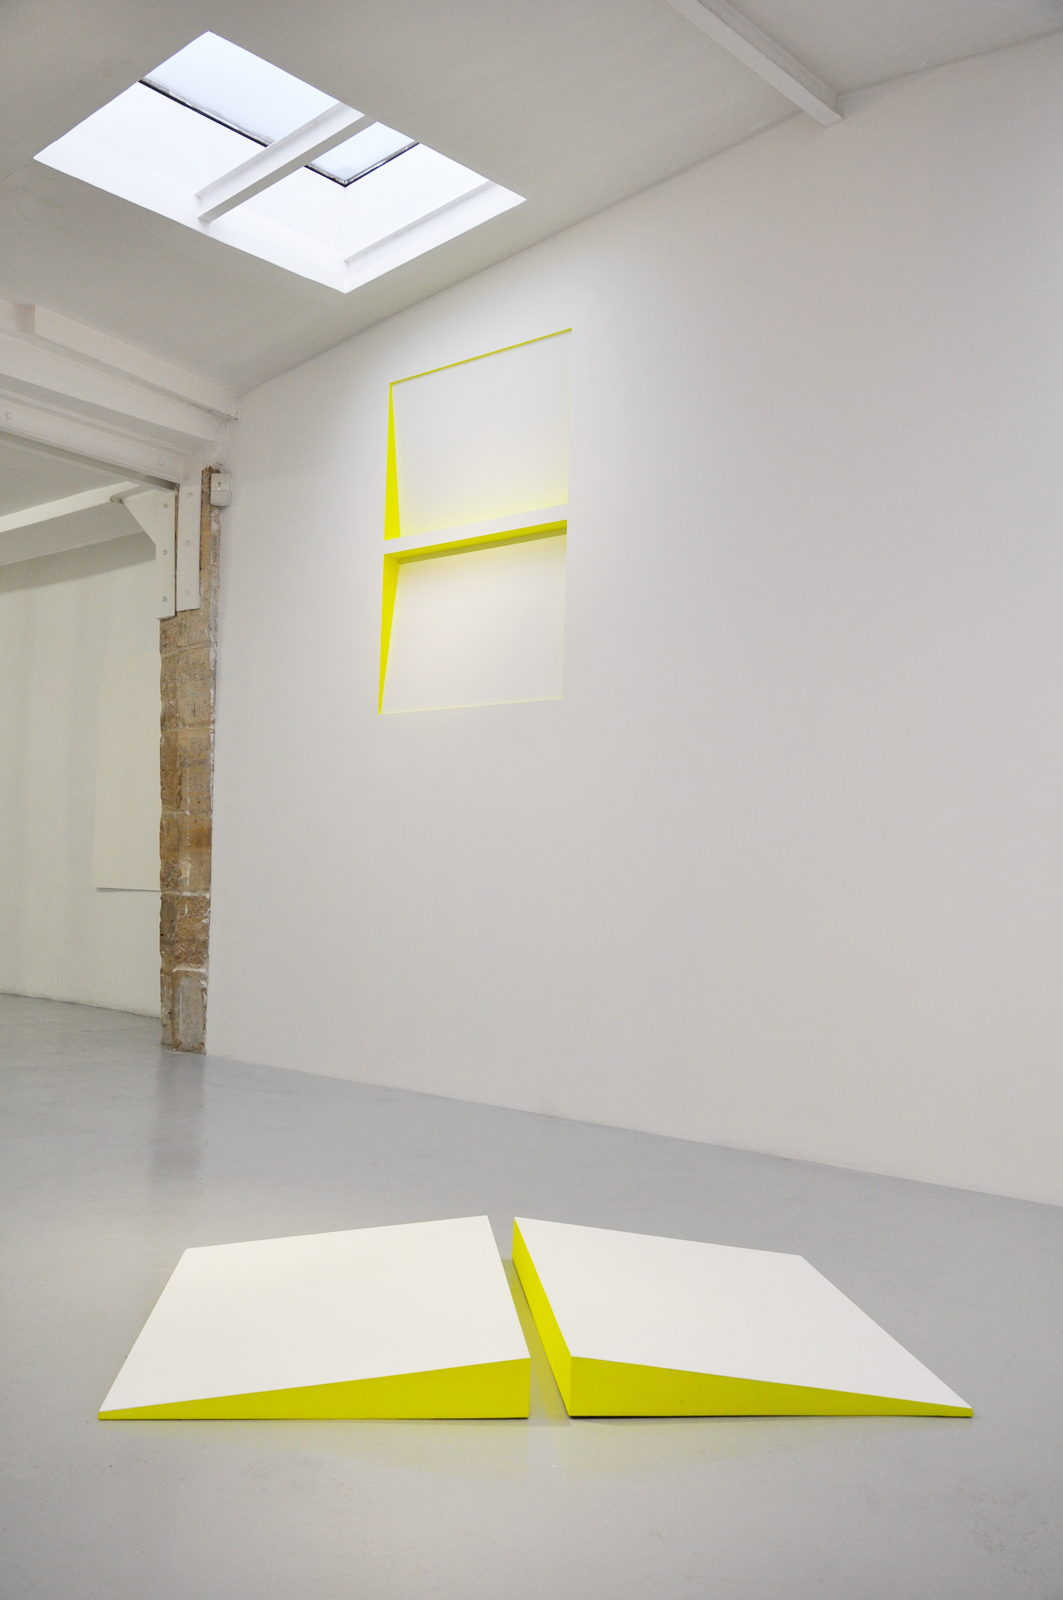   Site Related  Installation view Galerie Odile Ouizeman, Paris, 2012 